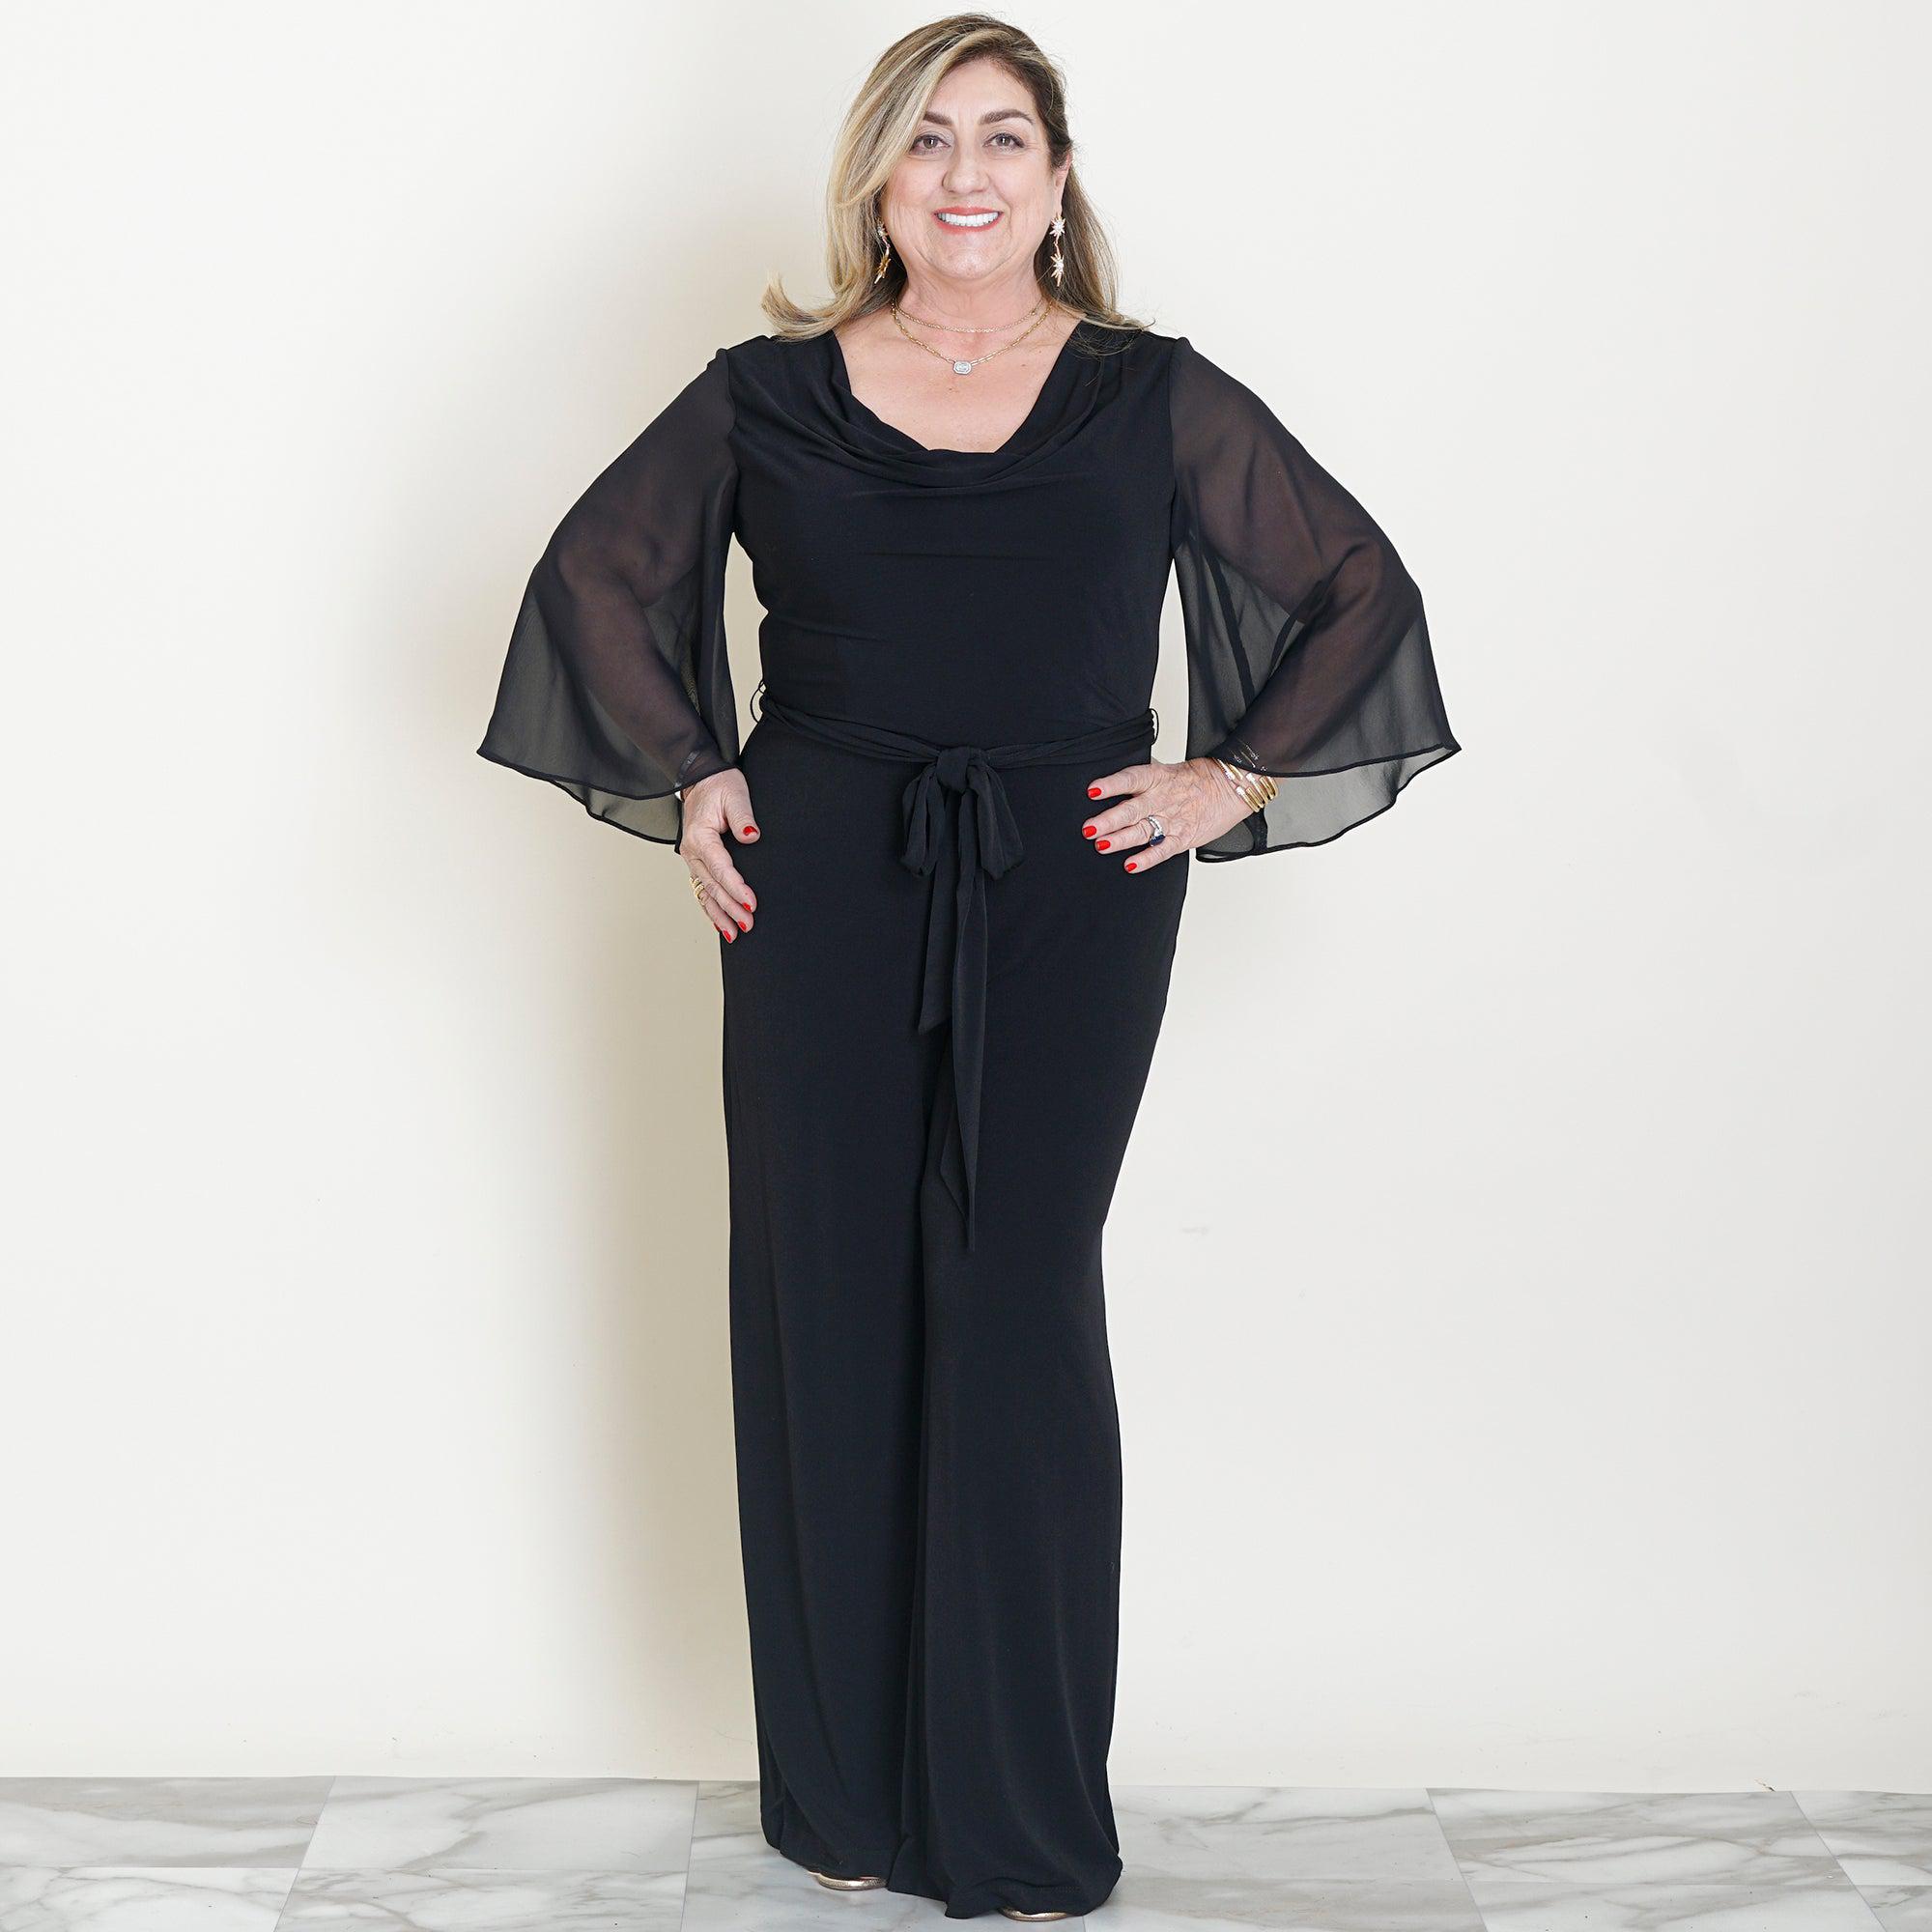 Woman posing wearing Black Uptown 2.0 Black Jumpsuit from Connected Apparel